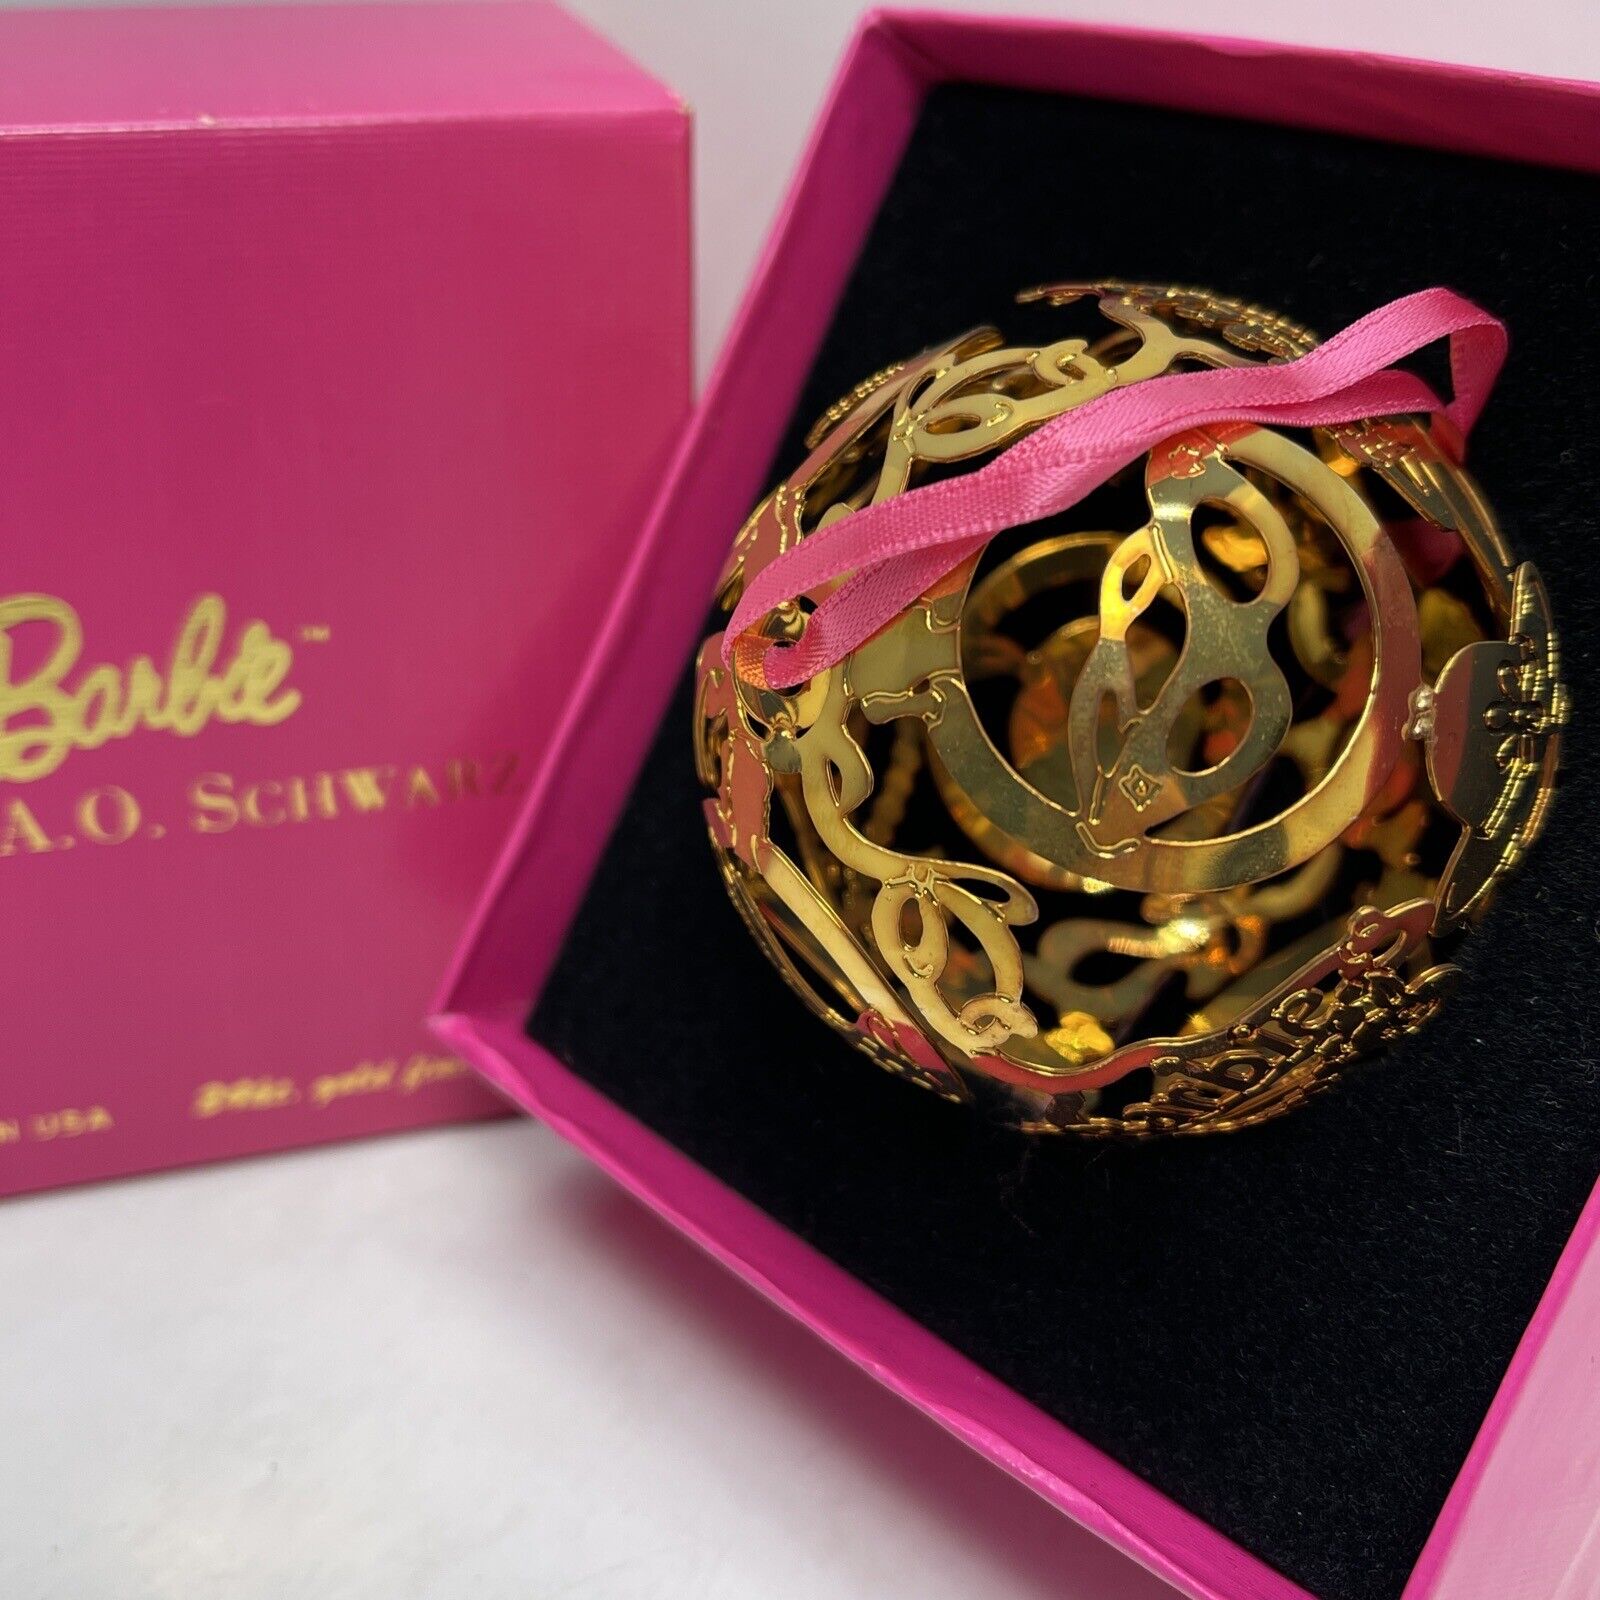 BARBIE at FAO Schwarz 24kt Gold Finish Sphere Ball with Icon Cut-Outs 744946 NEW